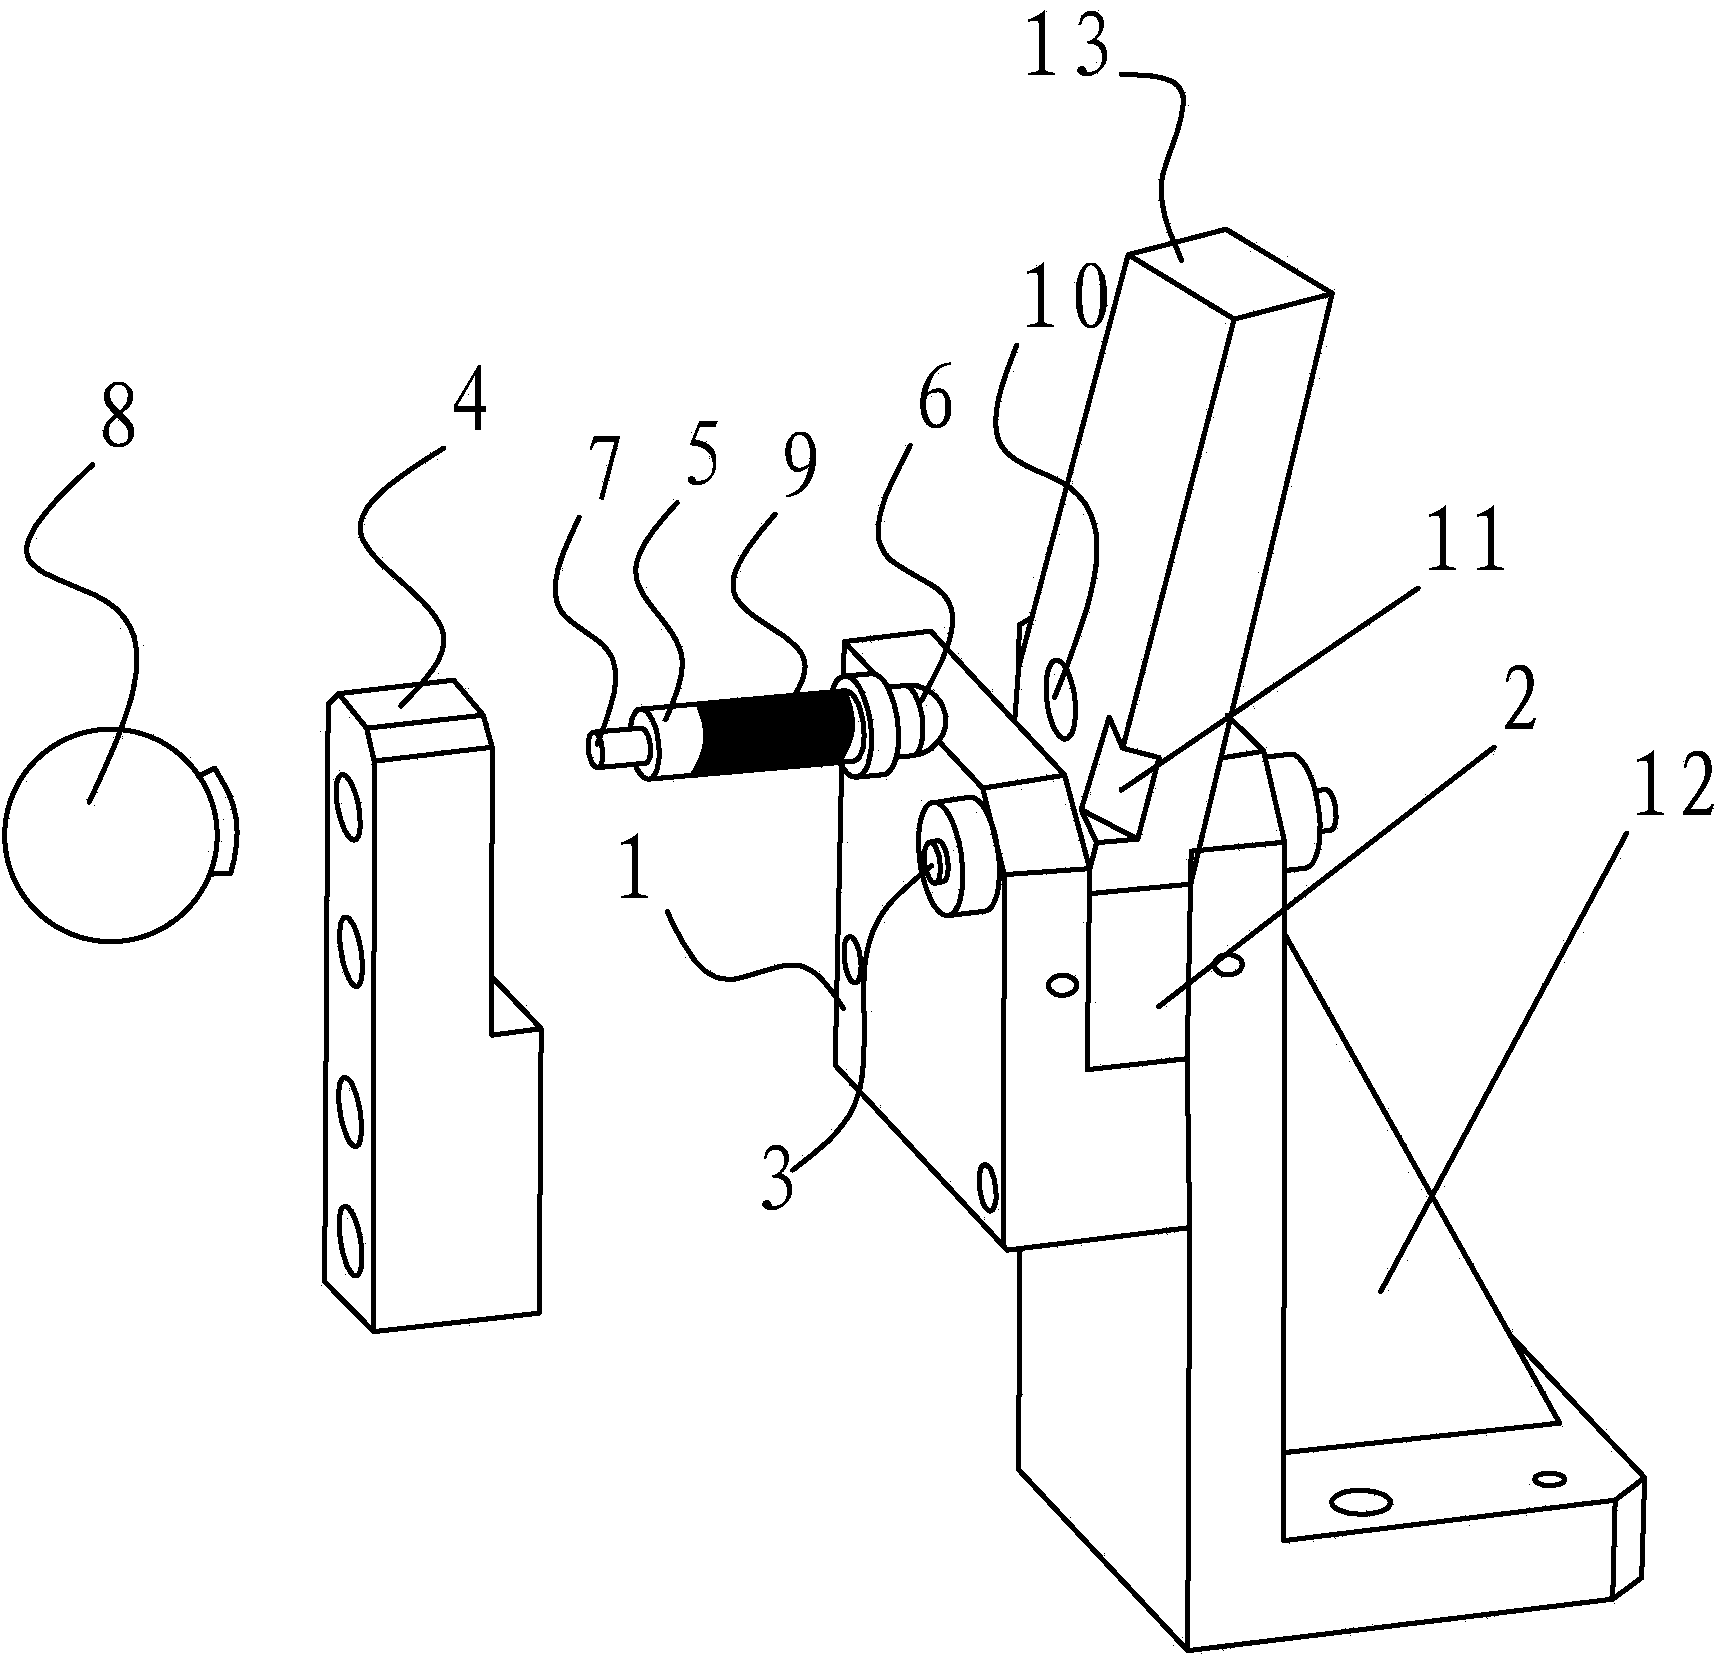 Turnover arm locking mechanism for test tool